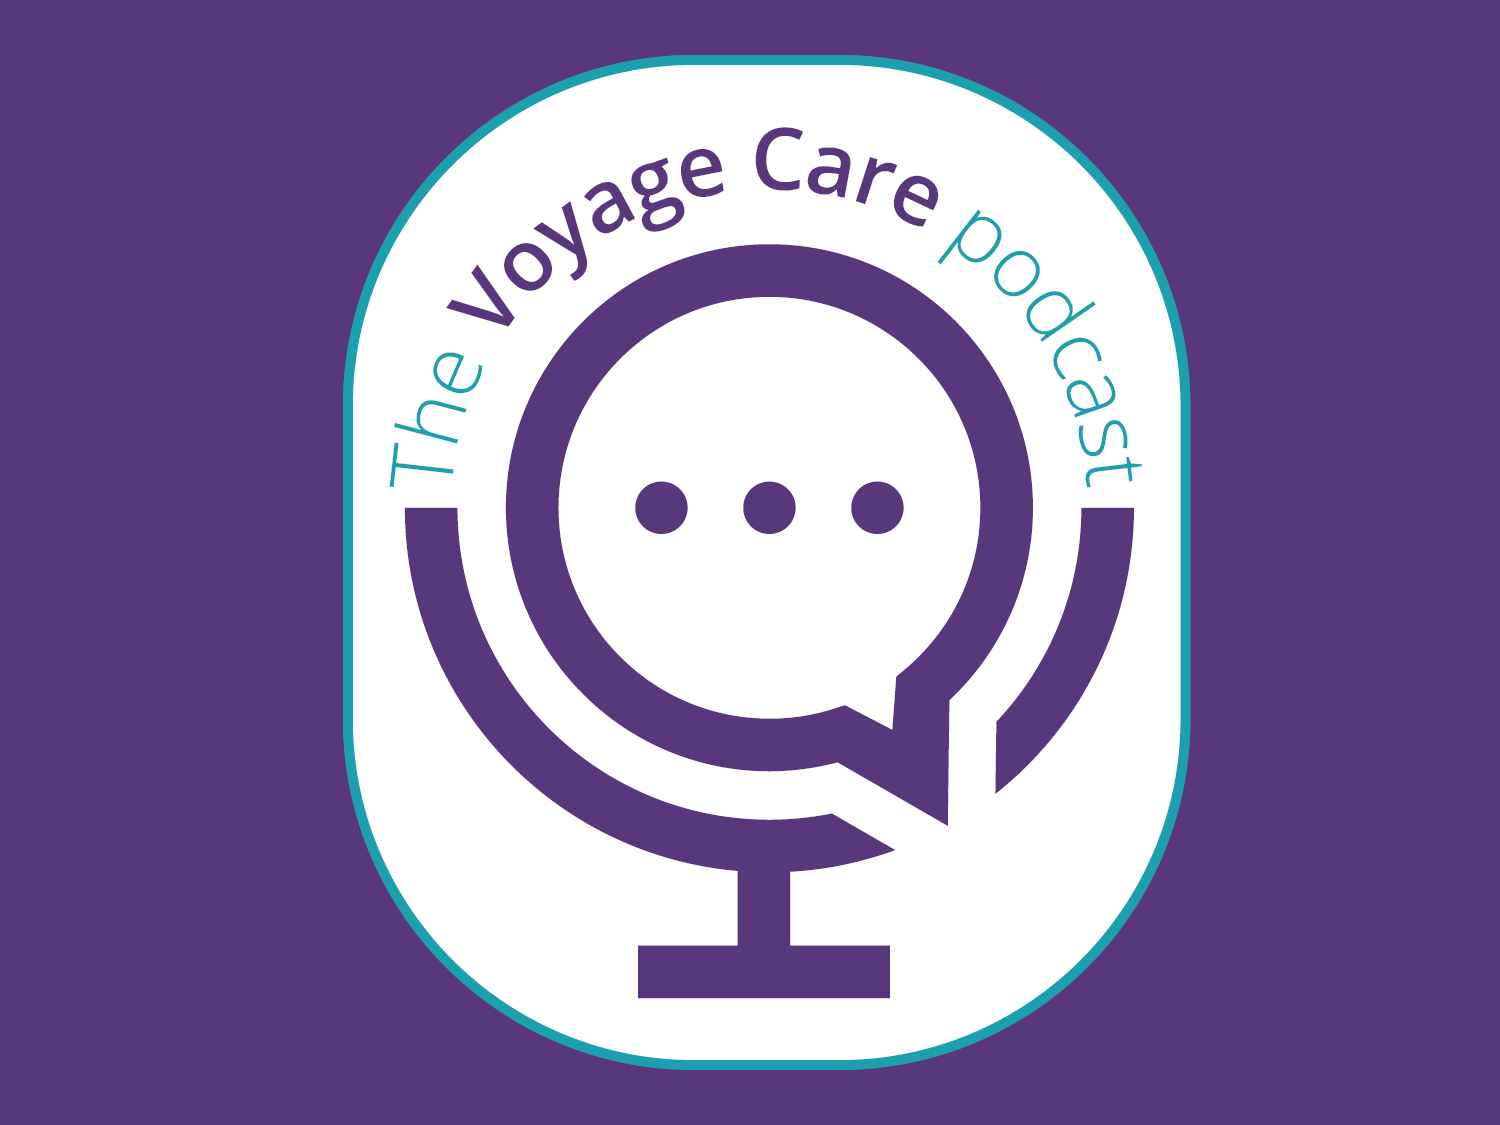 How we deliver person-centred care – Voyage Care Podcast season one round-up